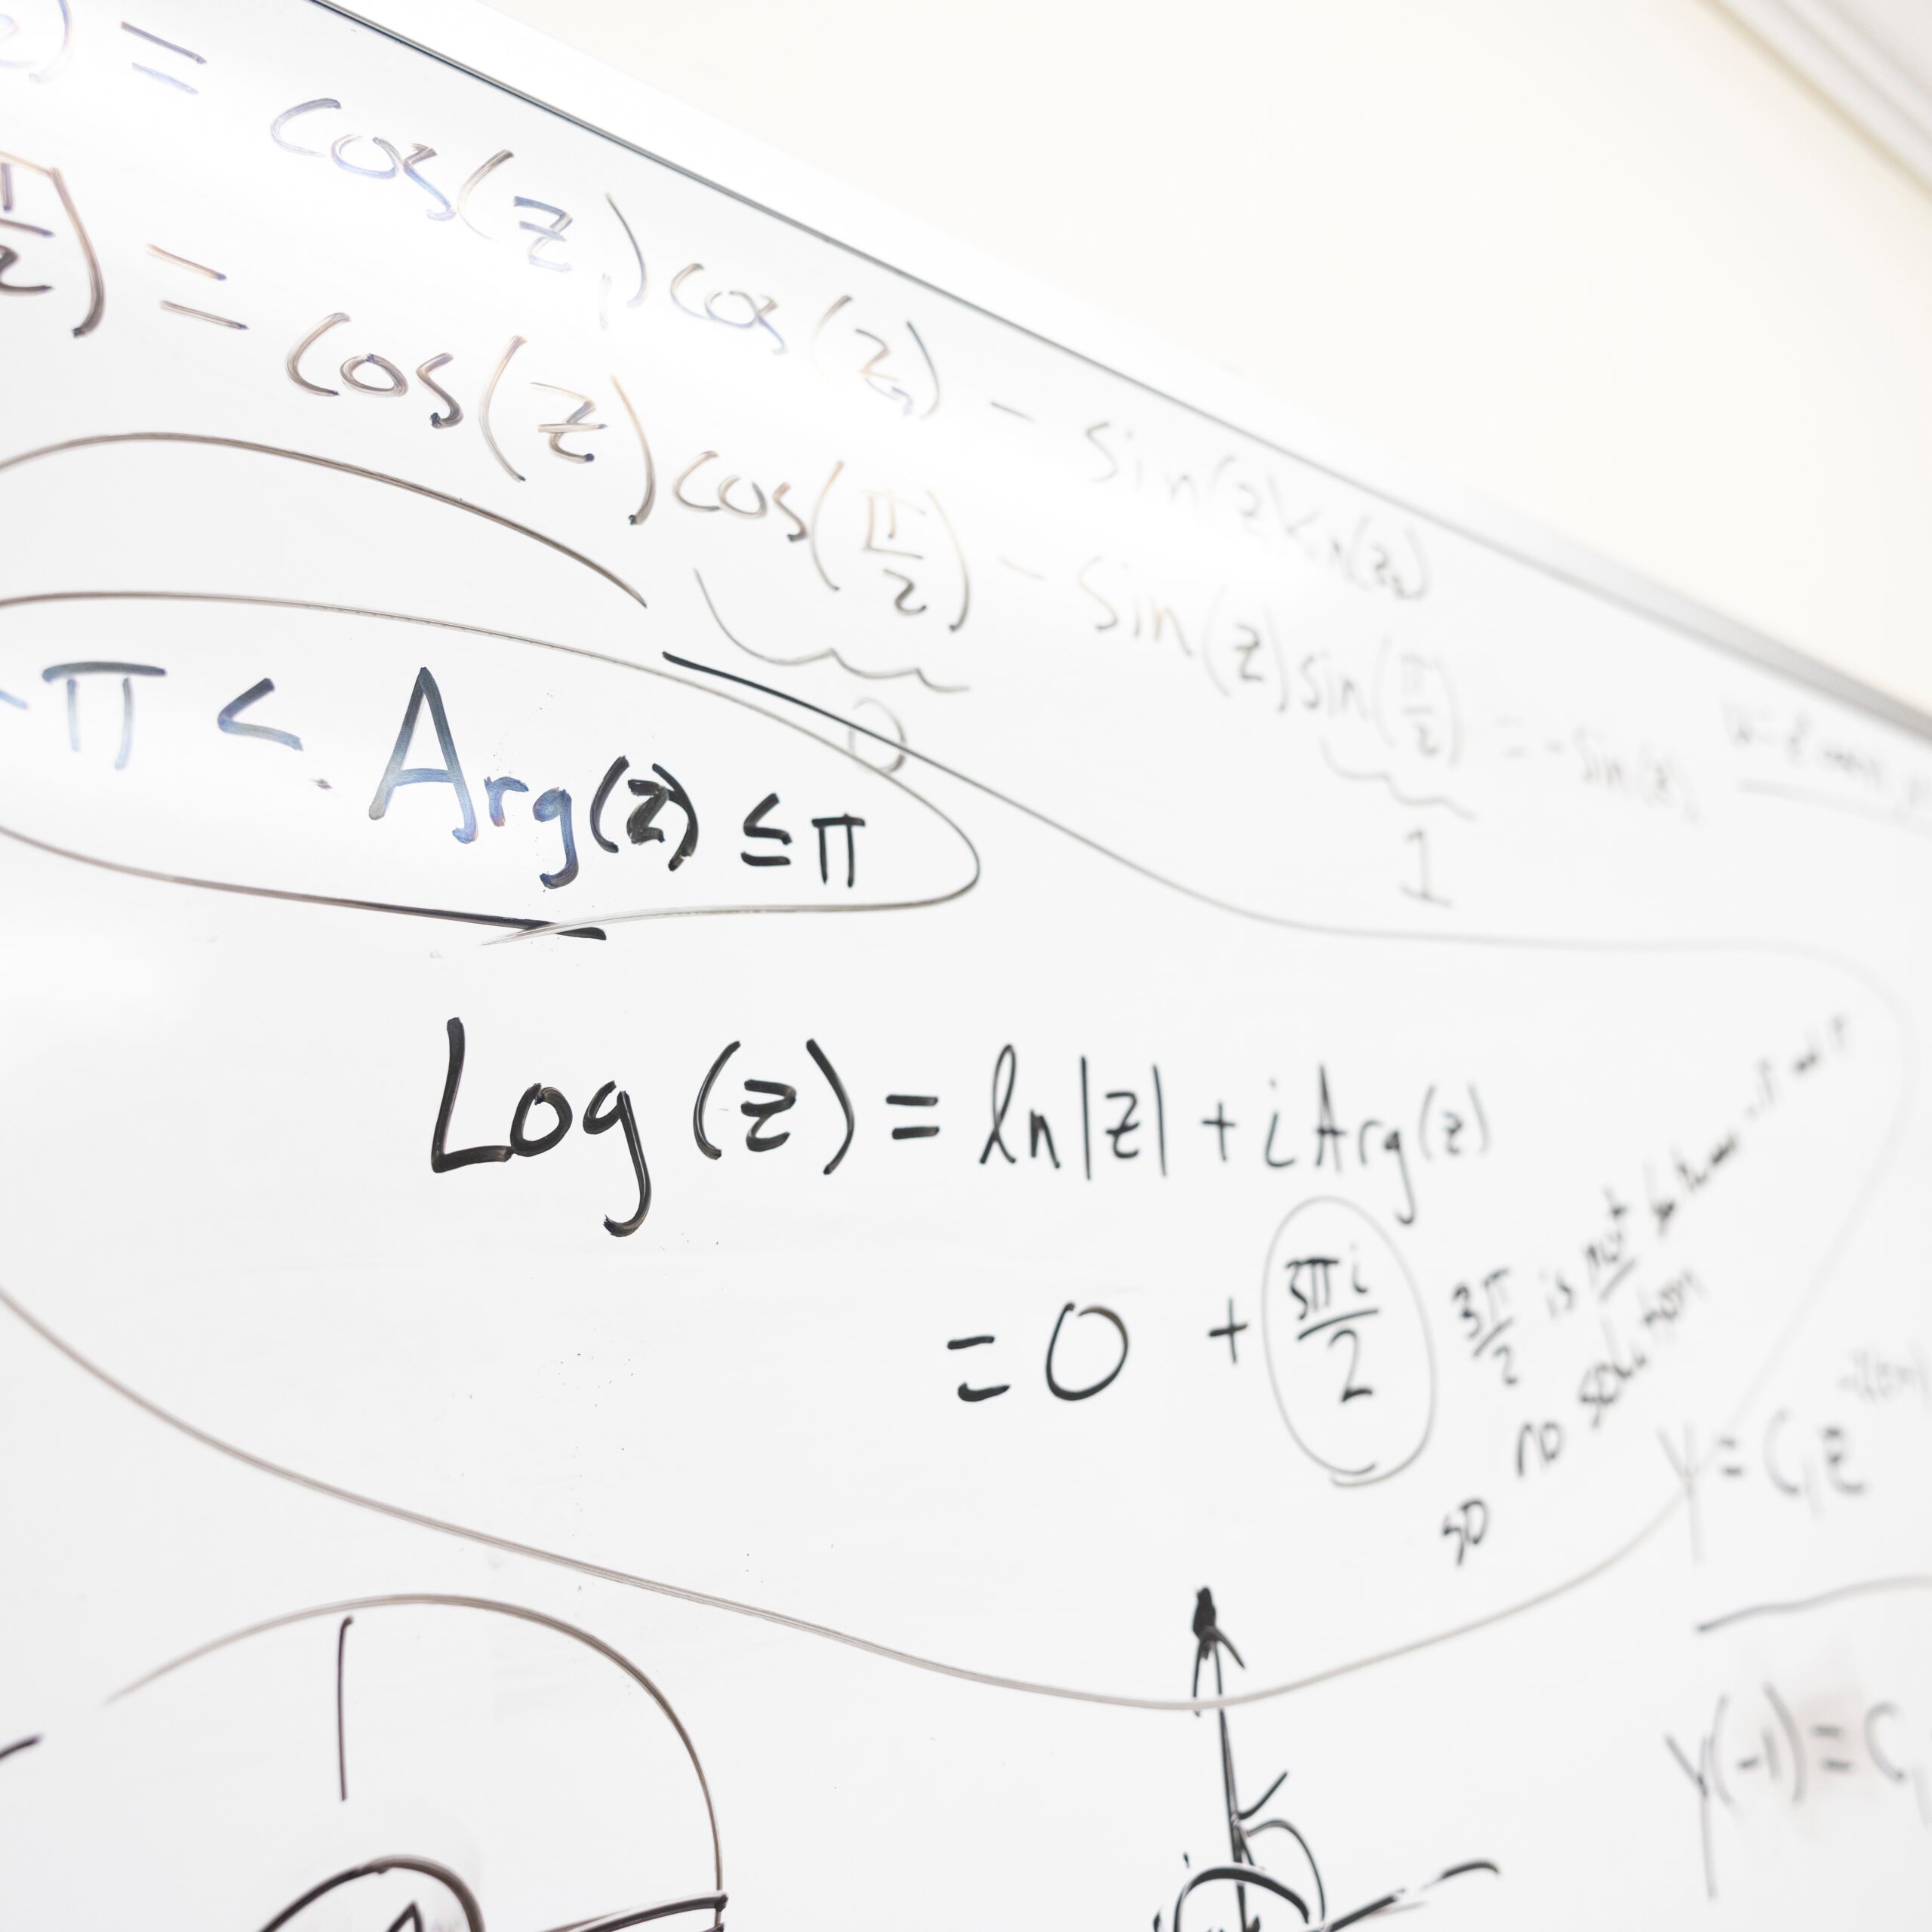 Complicated math on a white board